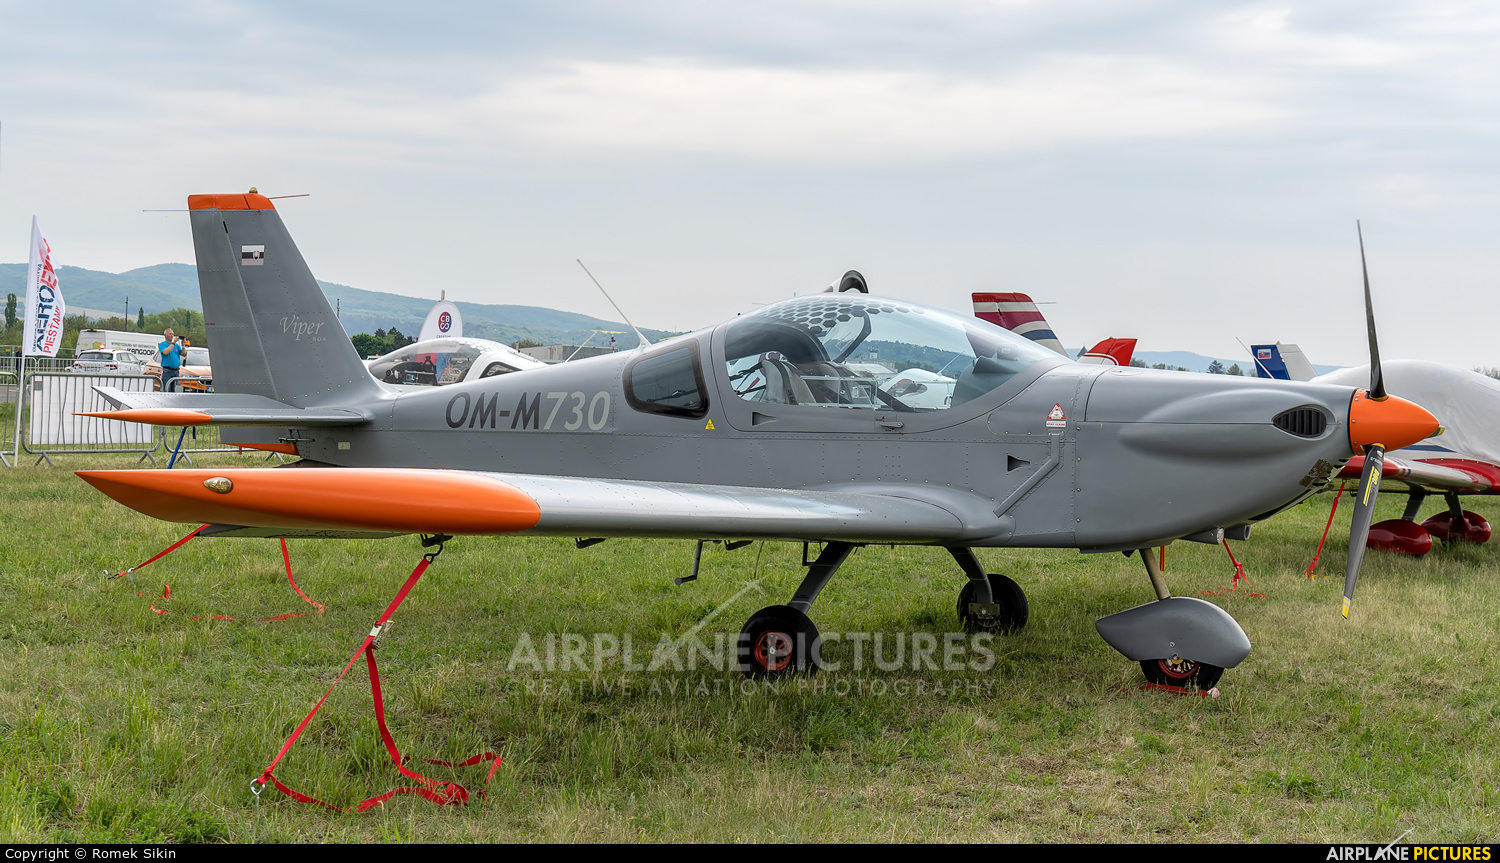 Private OM-M730 aircraft at Piestany